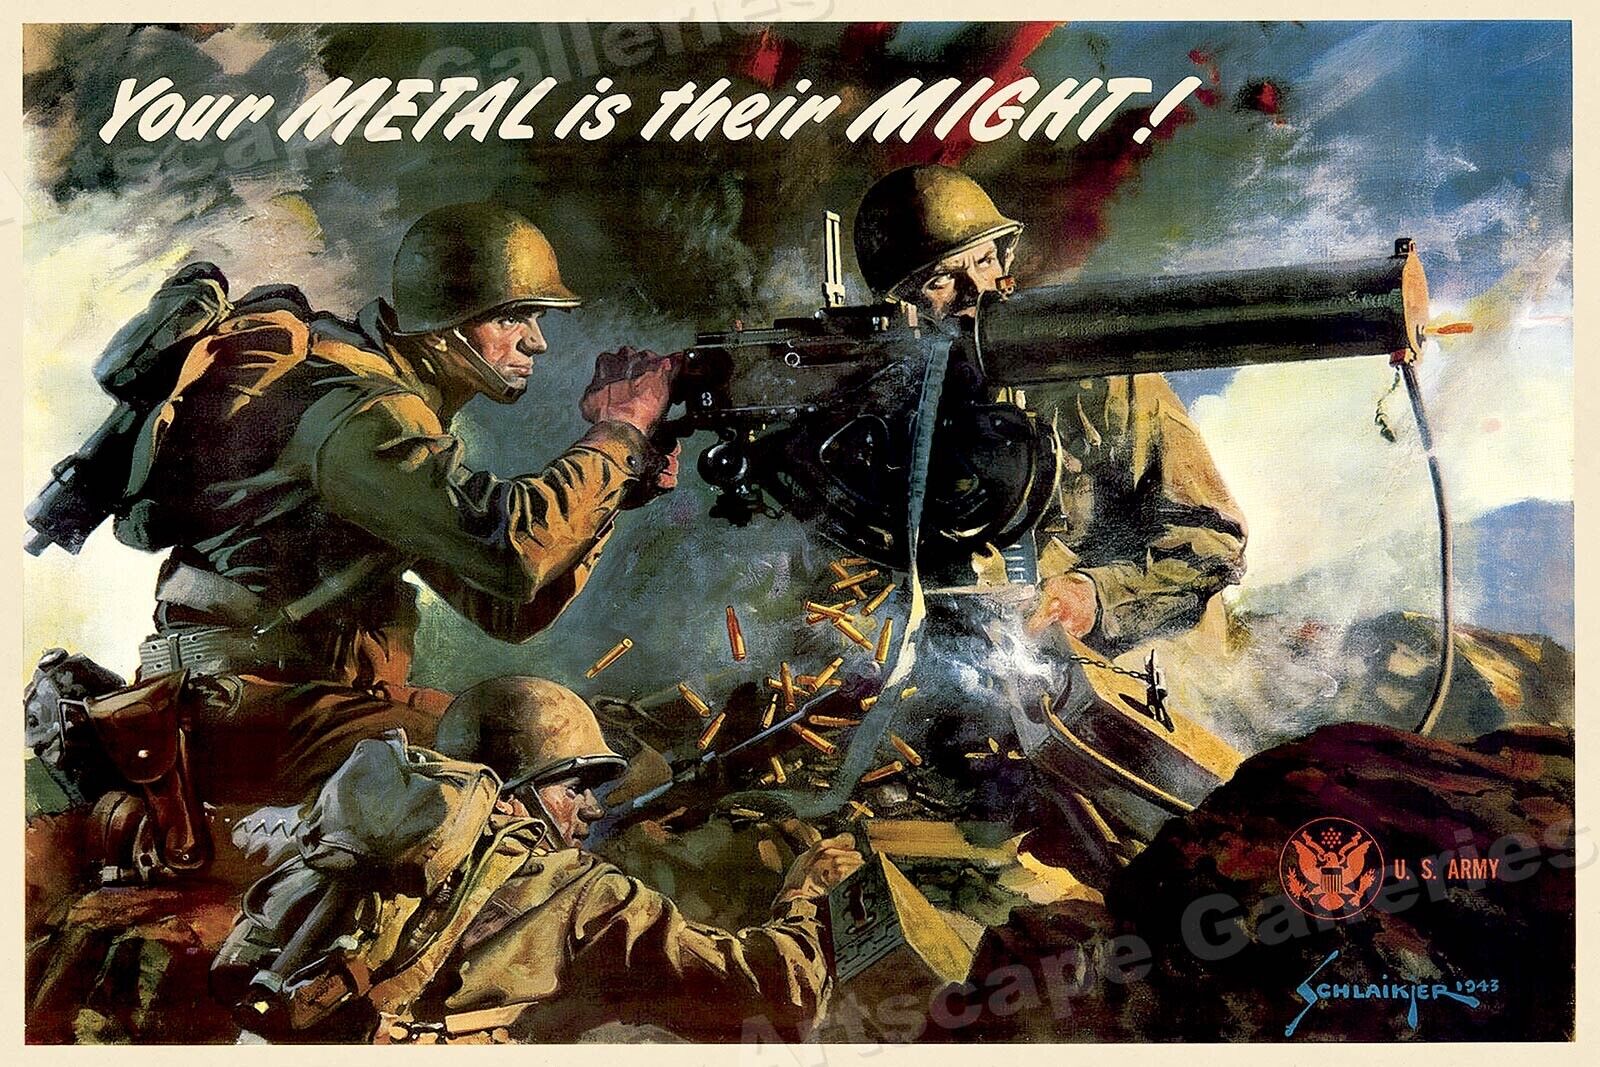 Your Metal is Their Might  1943 Vintage Style WW2 Poster - 16x24